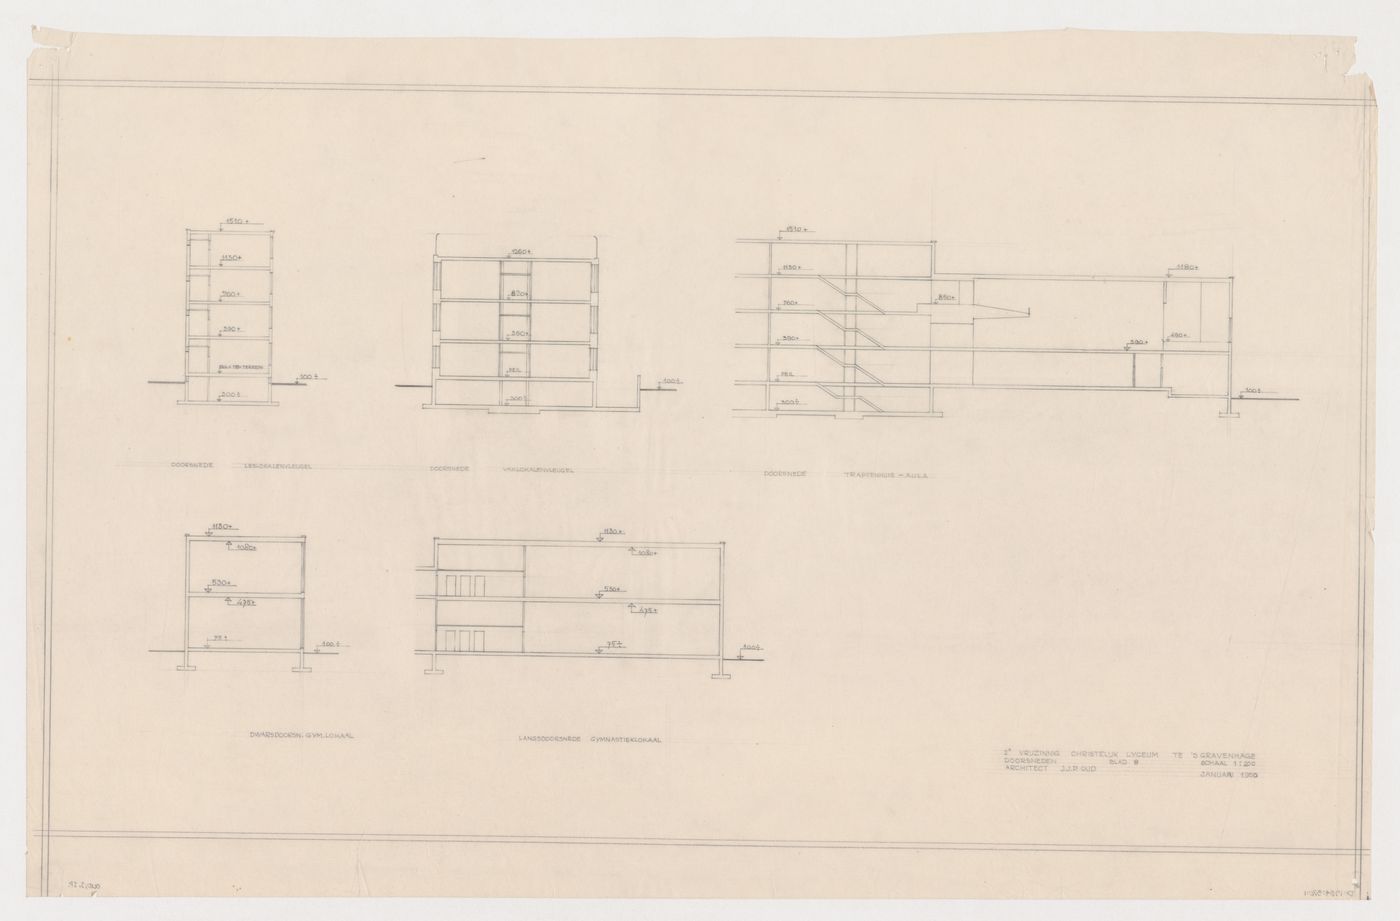 Sections for classroom wings, a gymnasium, stairs and an auditorium for the Second Liberal Christian Lyceum, The Hague, Netherlands